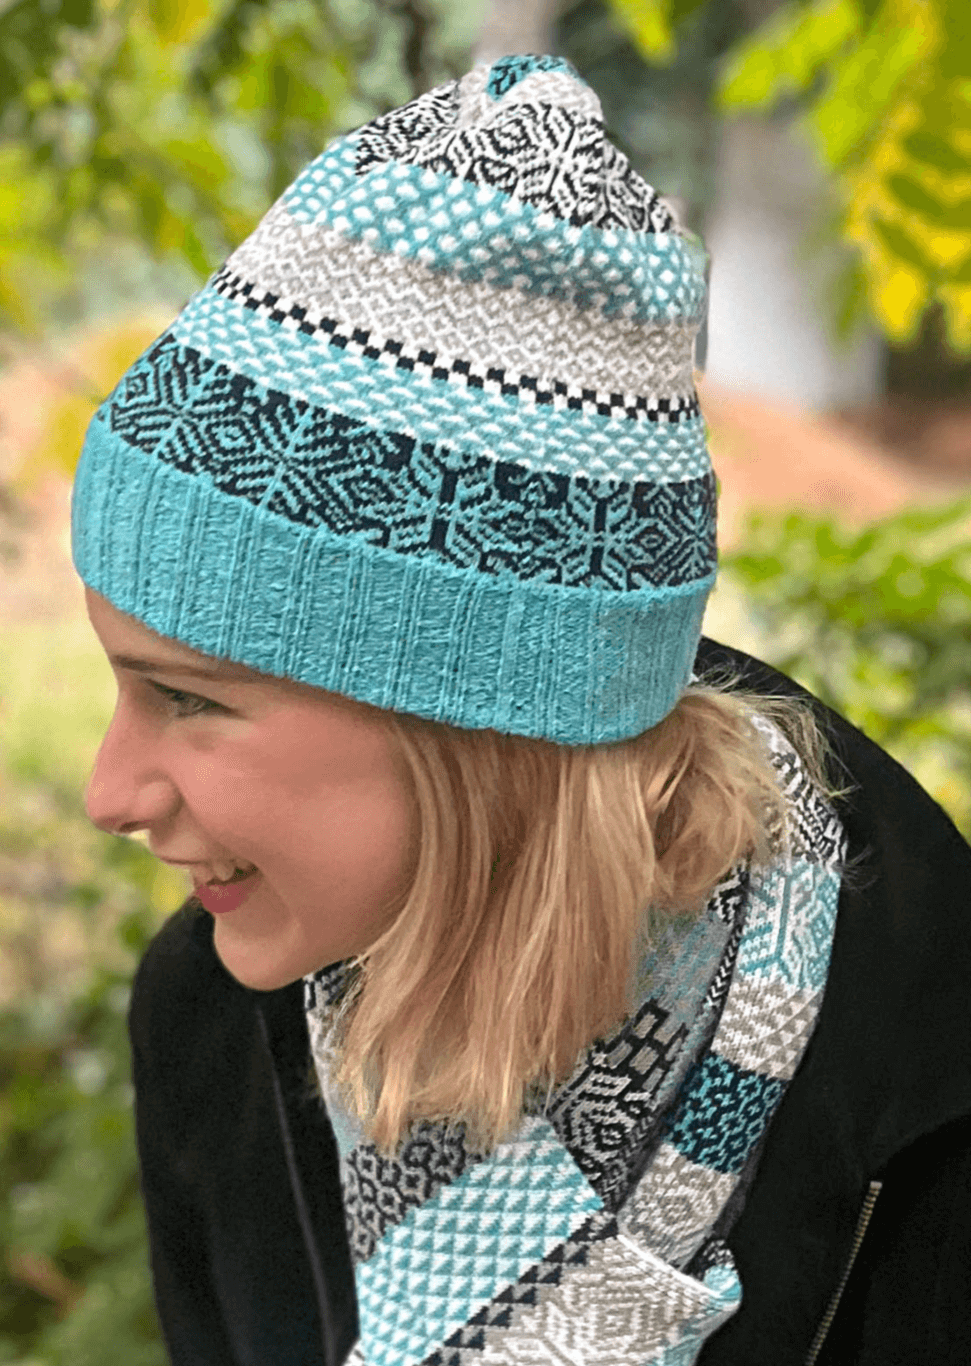 Solmate SNOWFALL Knitted Beanie Hat with Colors Turquoise, Navy, Gray & White | Made in USA | Classy Cozy Cool Women's Made in America Clothing Boutique